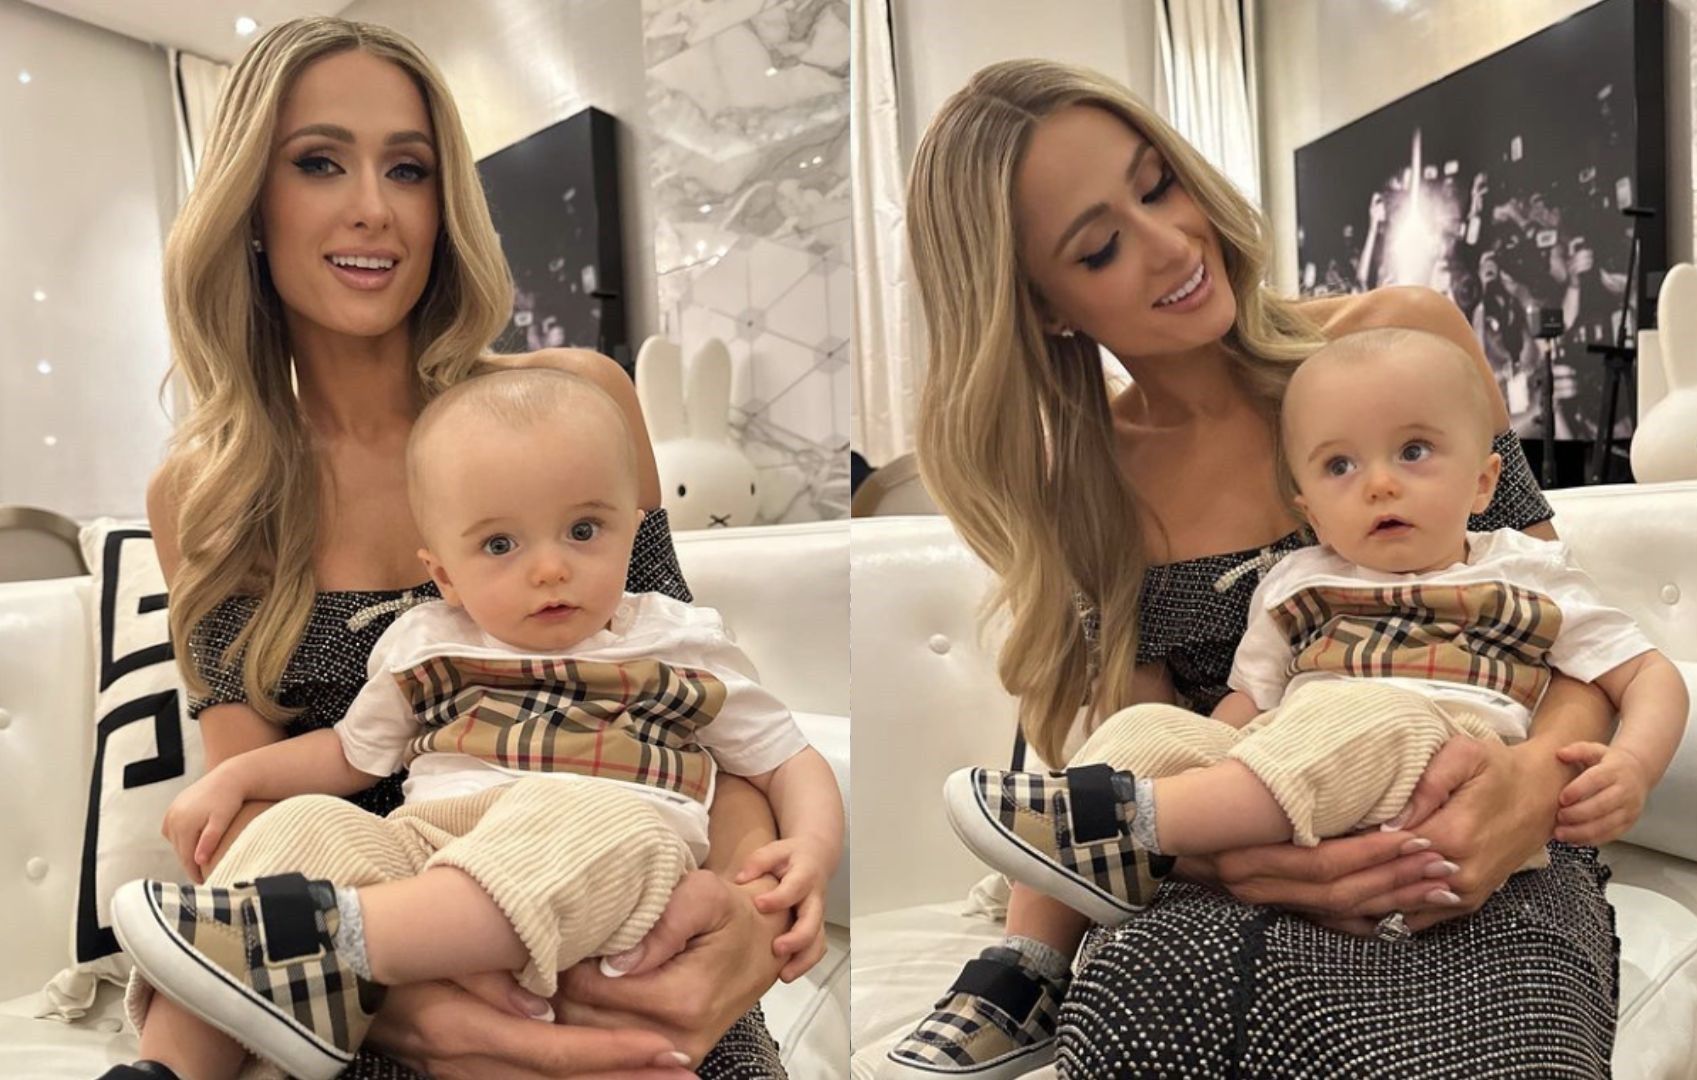 'My world, biggest blessing': Paris Hilton defends infant son from 'big head' comments